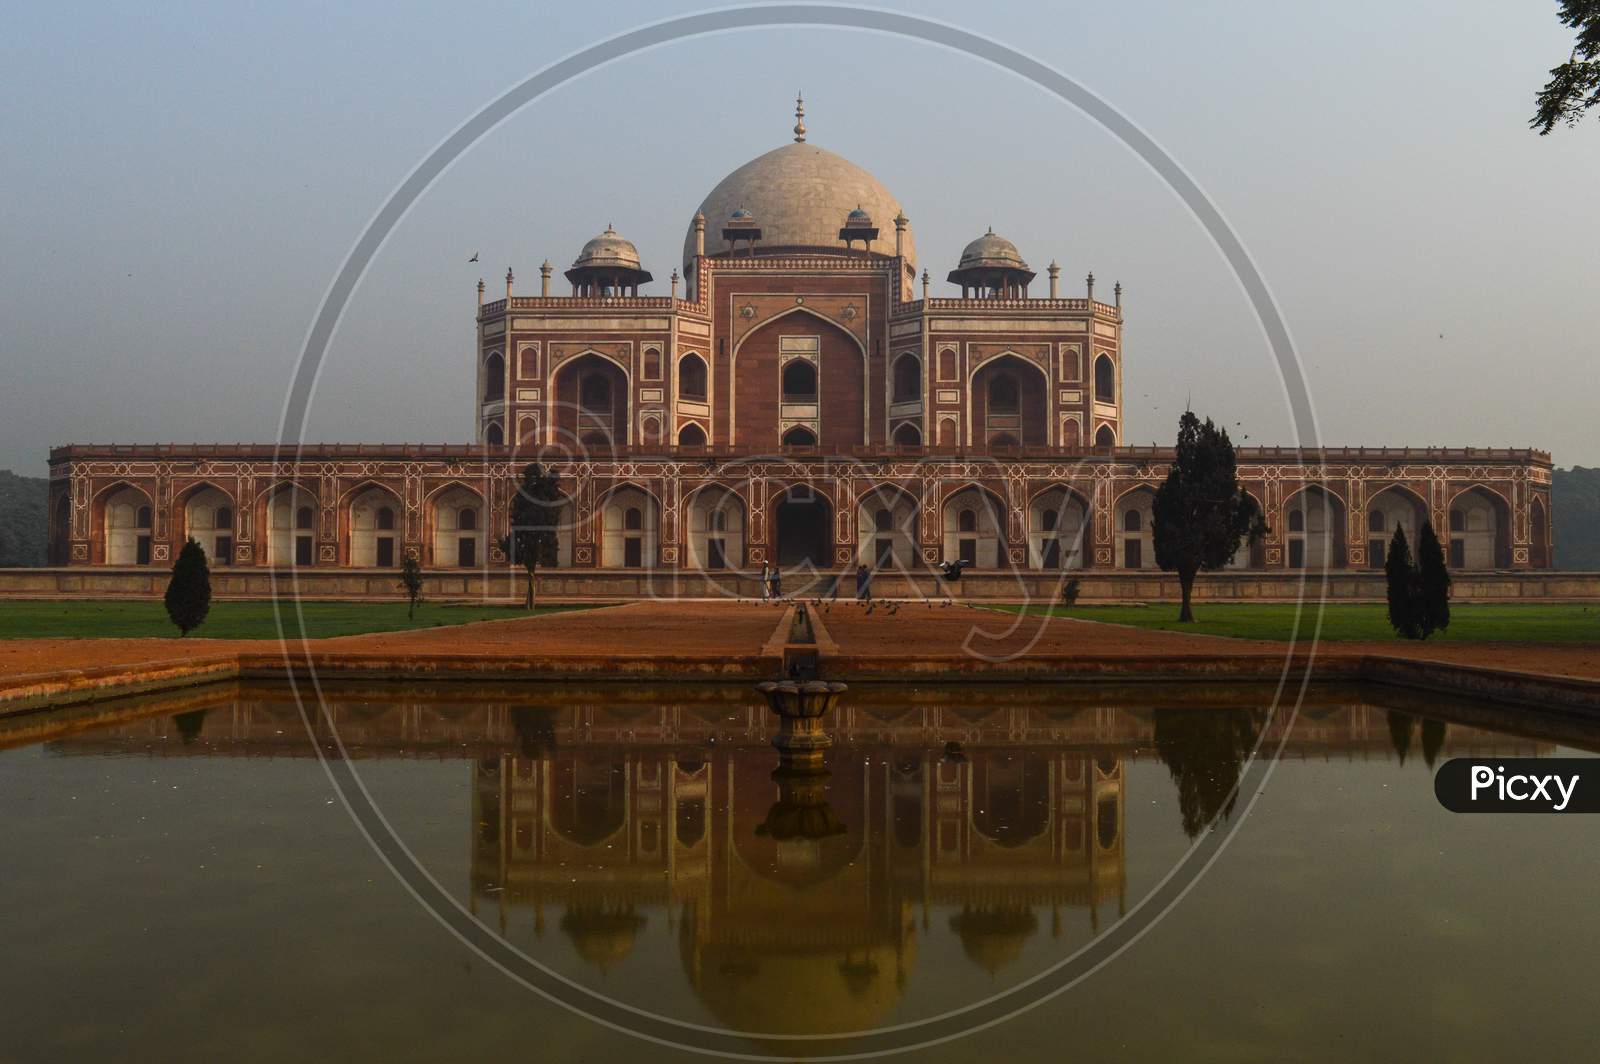 A Reflection In Water And Mesmerizing View Of Humayun Tomb Memorial From The Main Gate,Entrance At Winter Foggy Morning.